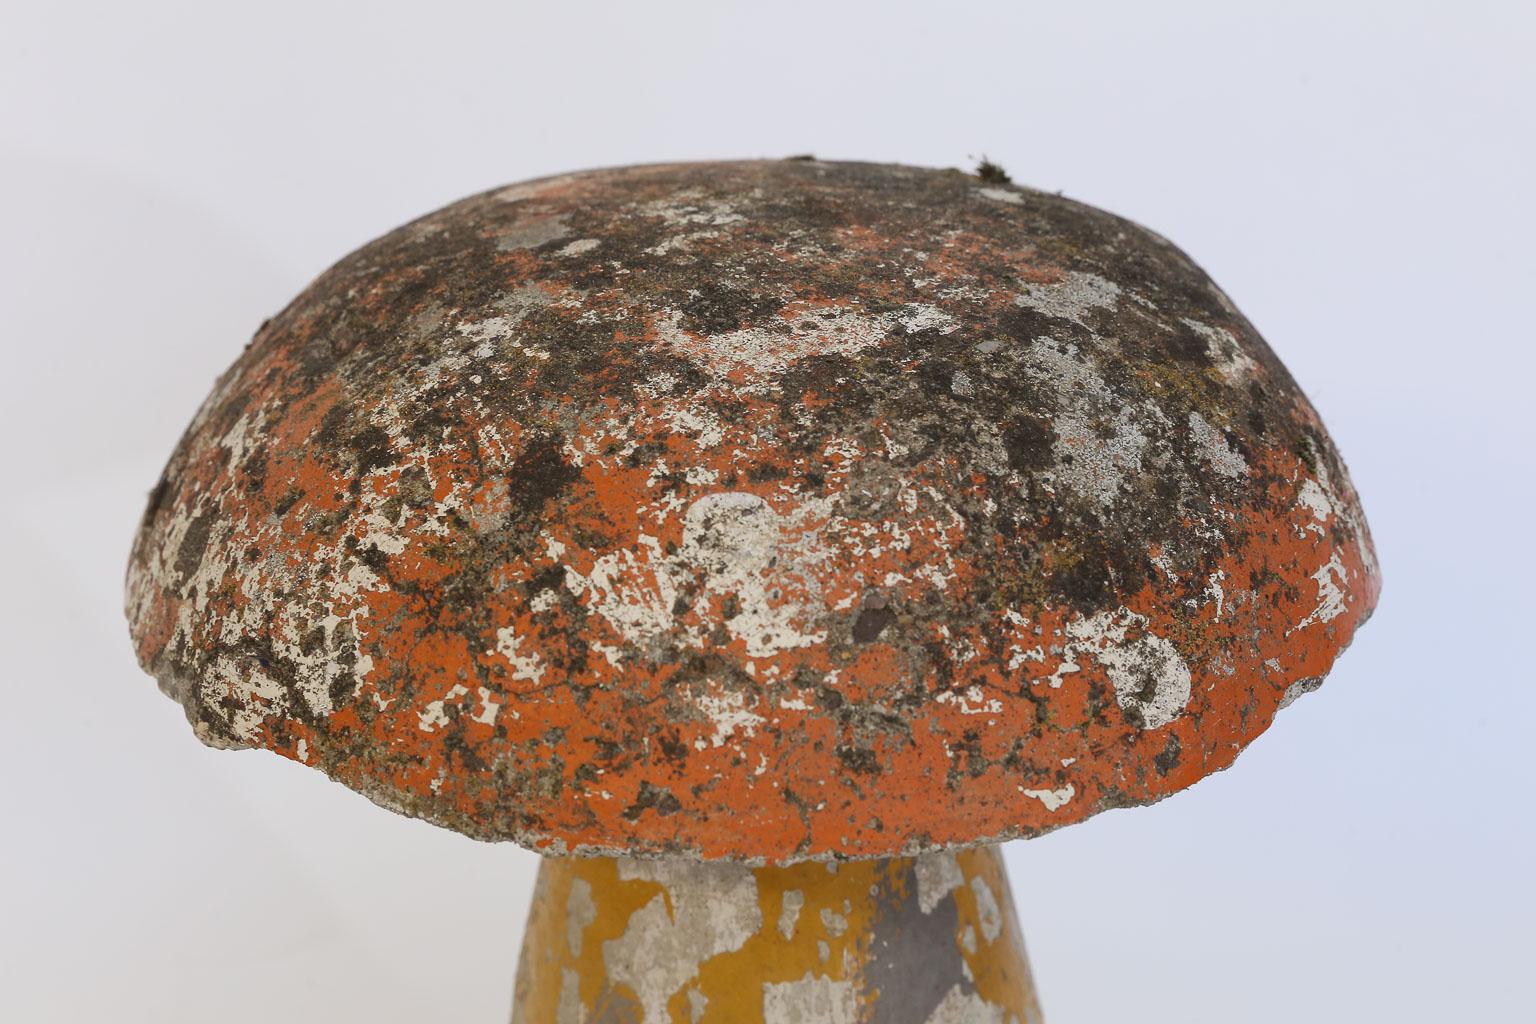 Found in France, this adorable concrete garden mushroom will add delight and whimsy to your home or garden. The paint has worn to a wonderful patina.